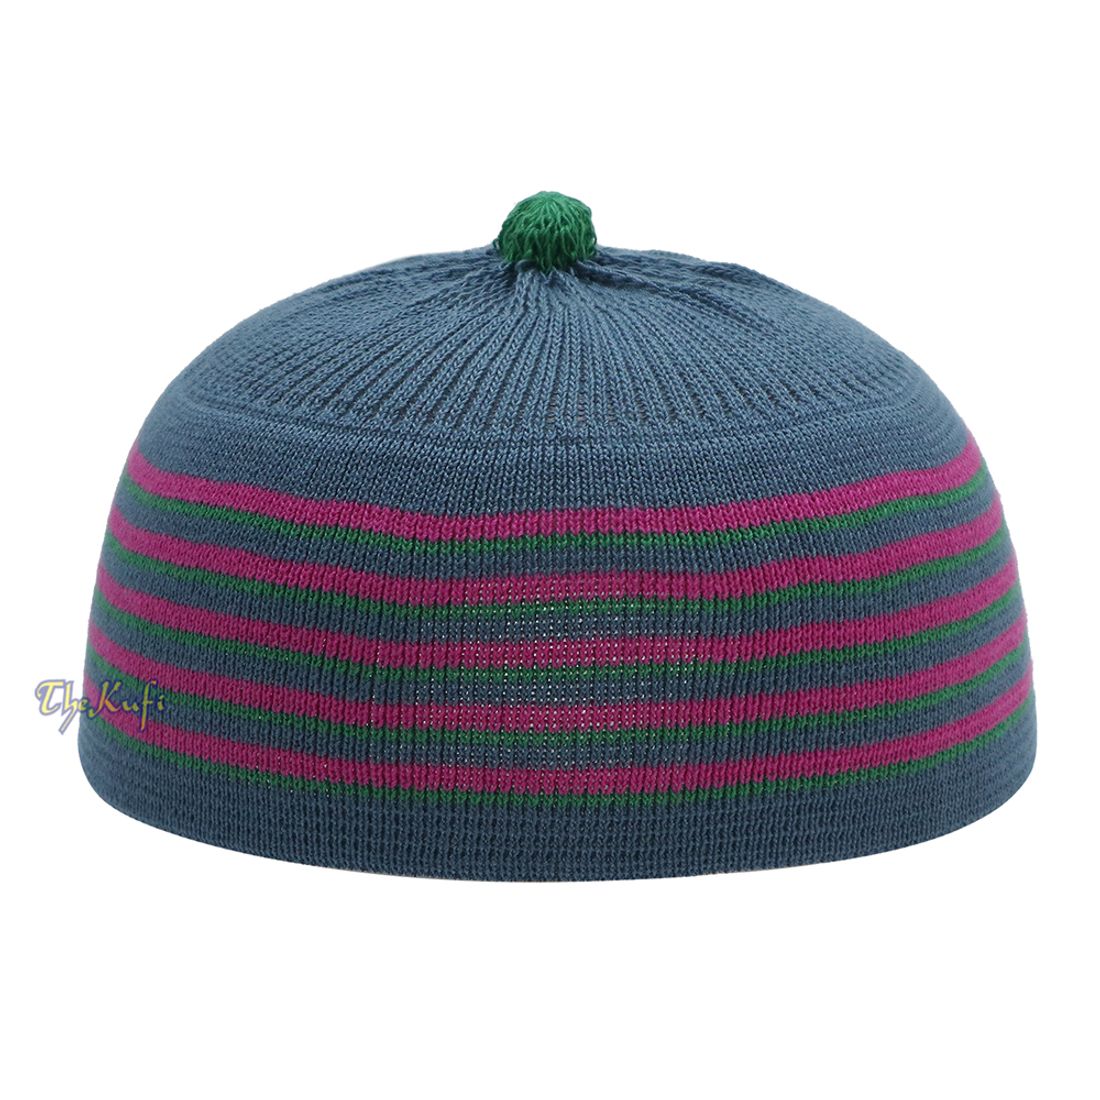 Dark Grey with Hot Pink and Green Lines Baby or Infant Kufi Pompom Stretchable Beanie